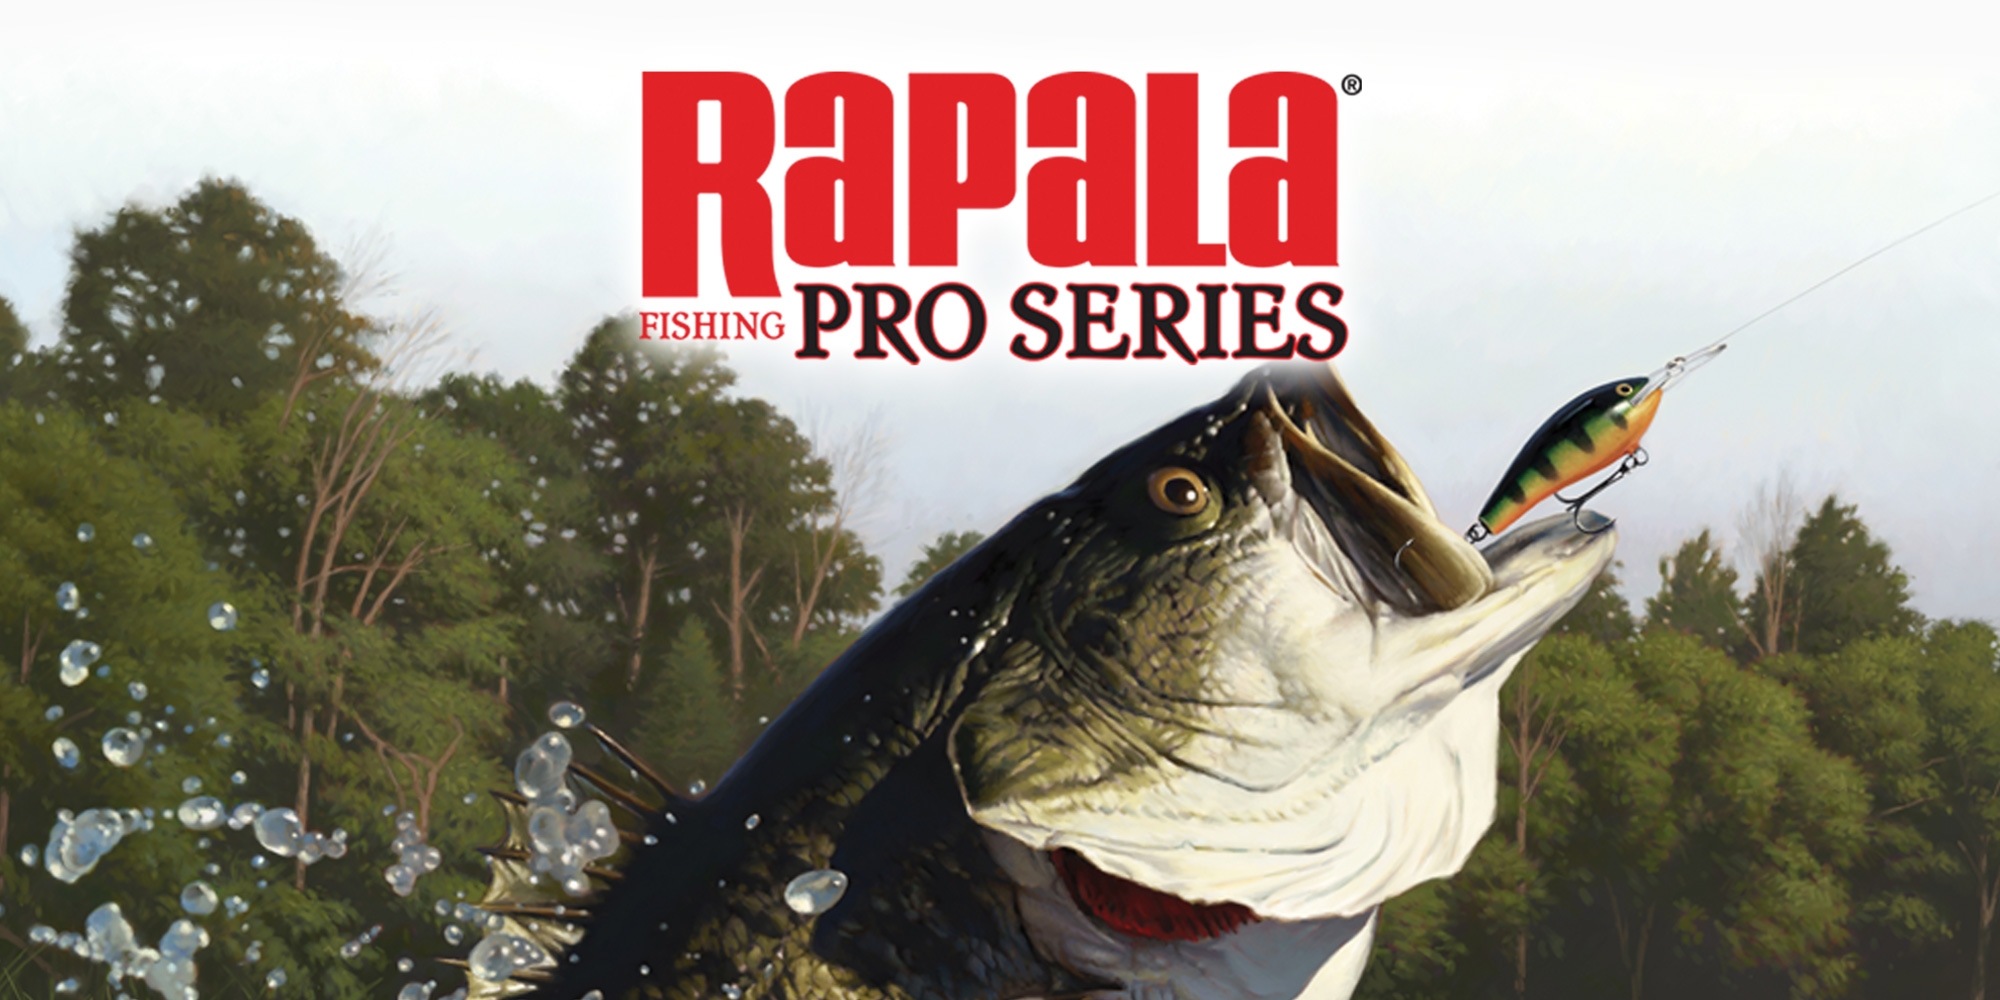 https://gaming-cdn.com/images/products/11773/orig/rapala-fishing-pro-series-xbox-one-xbox-series-x-s-xbox-series-x-s-xbox-one-game-microsoft-store-europe-cover.jpg?v=1653922452